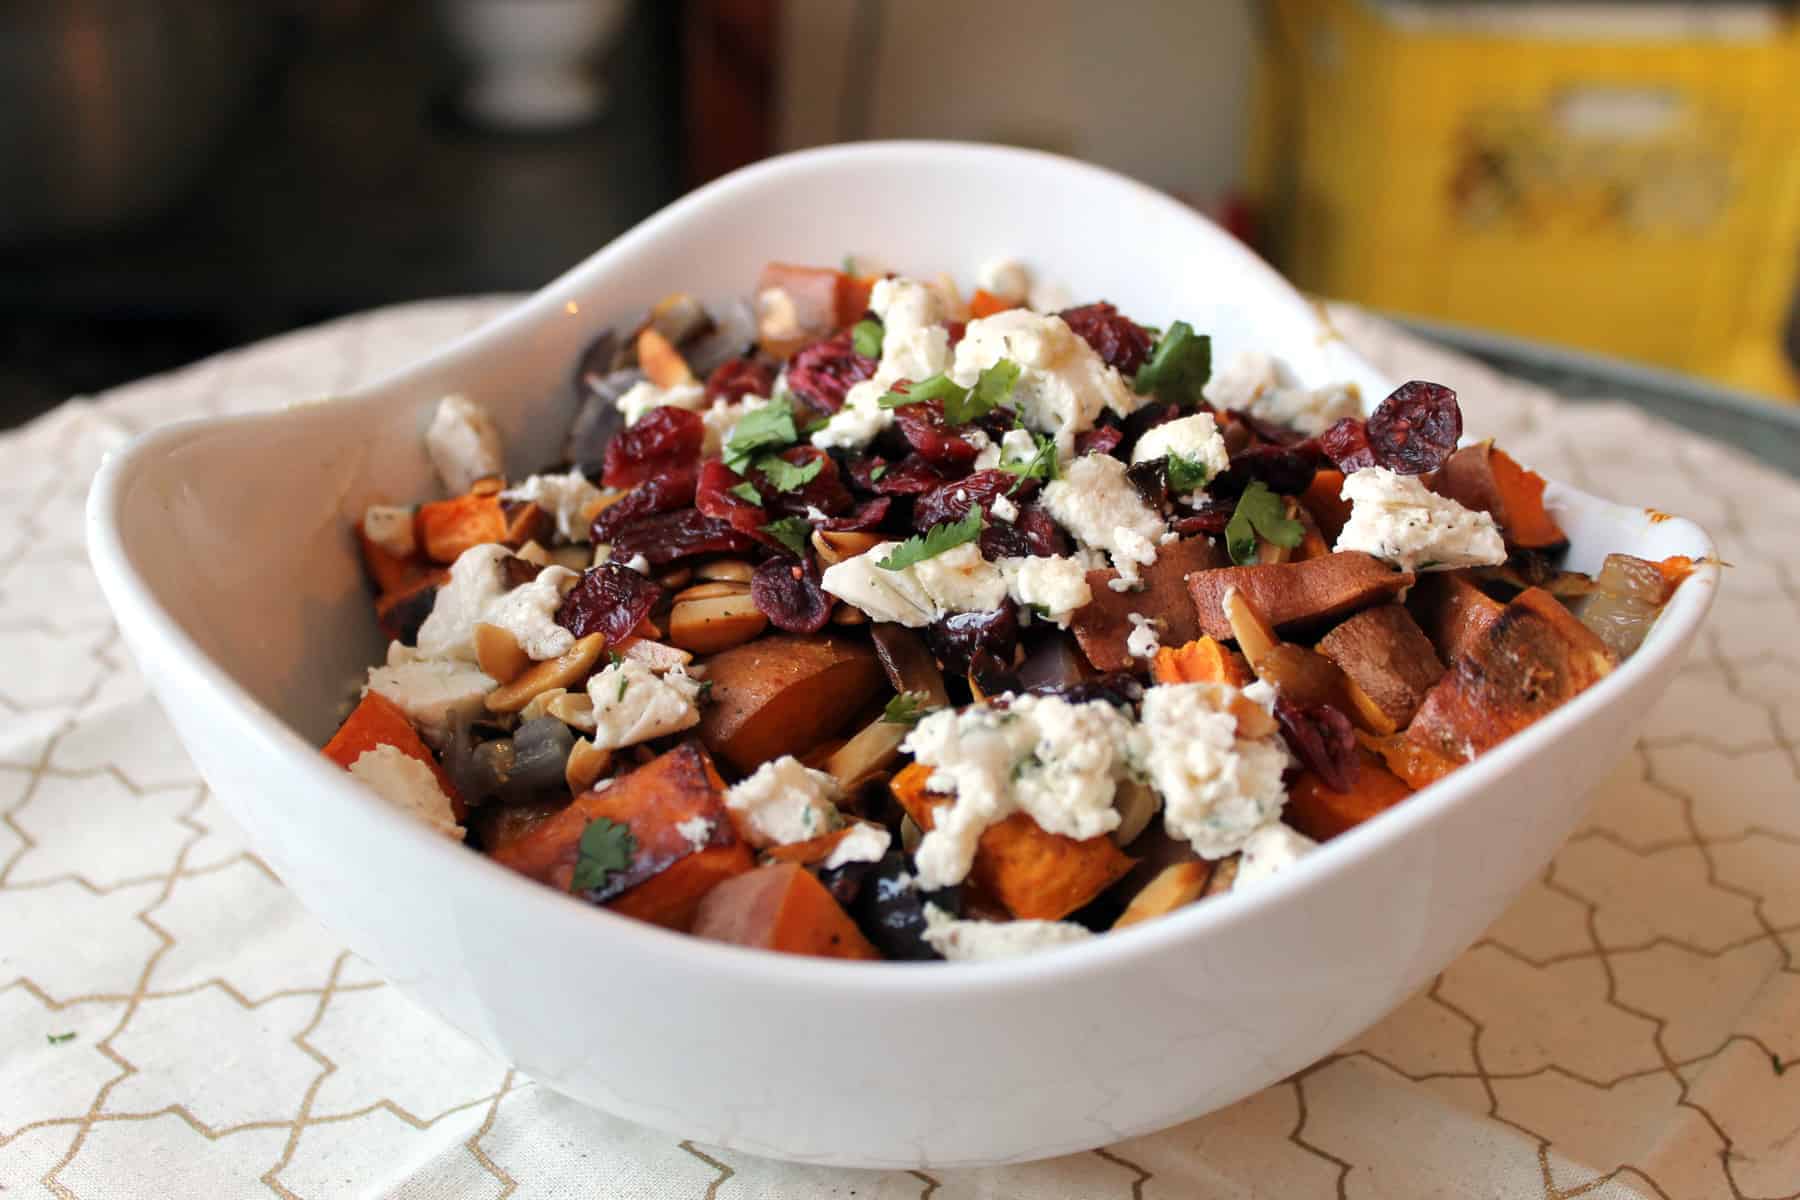 Roasted sweet potato salad with onions, cranberries and nuts